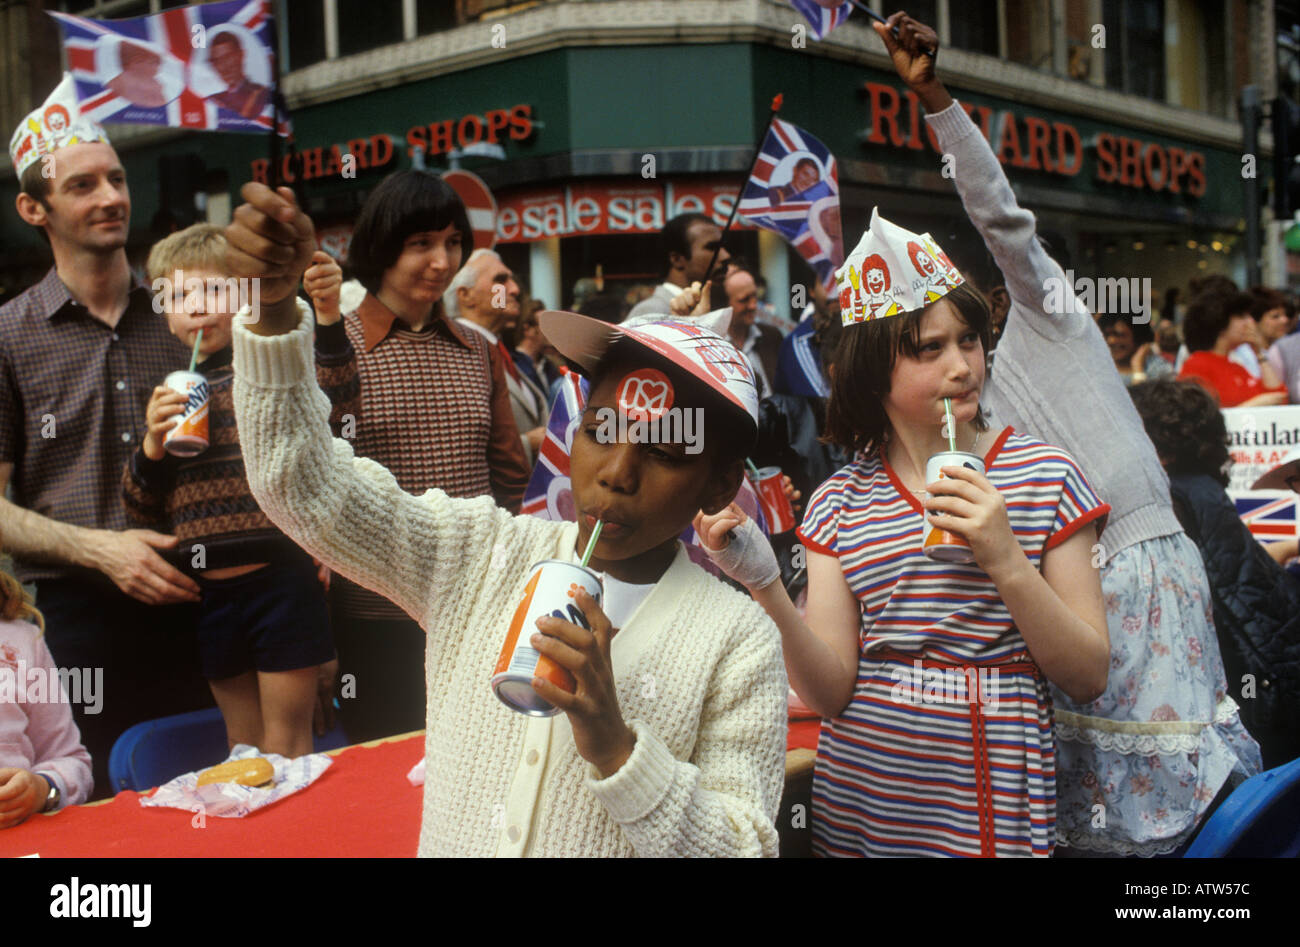 Royal Wedding, street party in 'Oxford Street'  to celebrate the marriage of Prince Charles and Lady Diana Spencer London England. 1981 HOMER SYKES Stock Photo